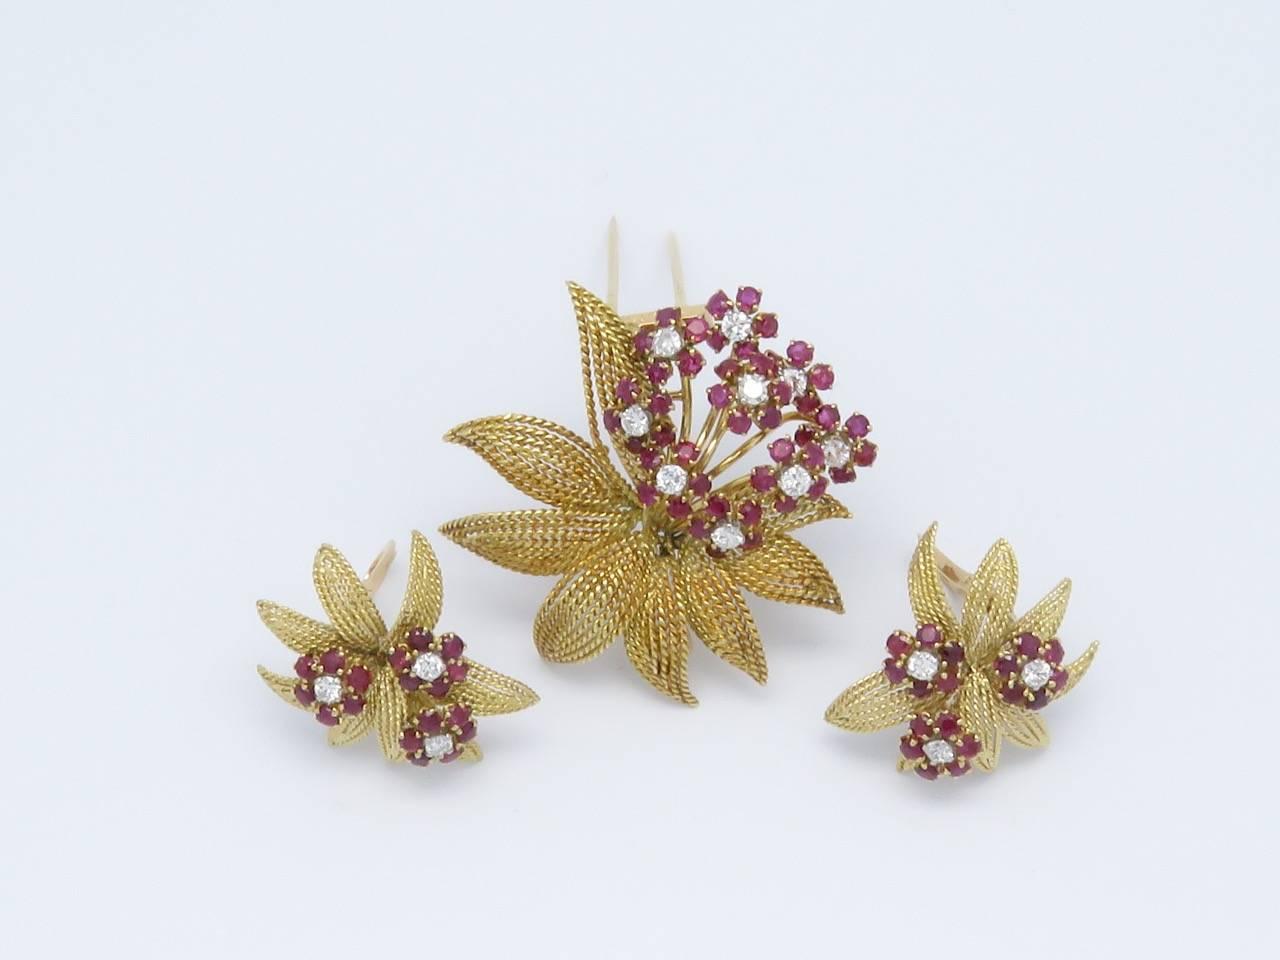 18K Gold,Diamonds and Ruby Earrings and Brooch Set. Signed by  J.LACLOCHE Paris-Cannes.
Circa 1950
Measurements:
Earrings:
 Length: 1.18 in (3cm)    Width: 1.18in (3cm)      Weight: 14.2 Grams
Brooch:
 Diameter: 1.85 in      Weight: 18.8